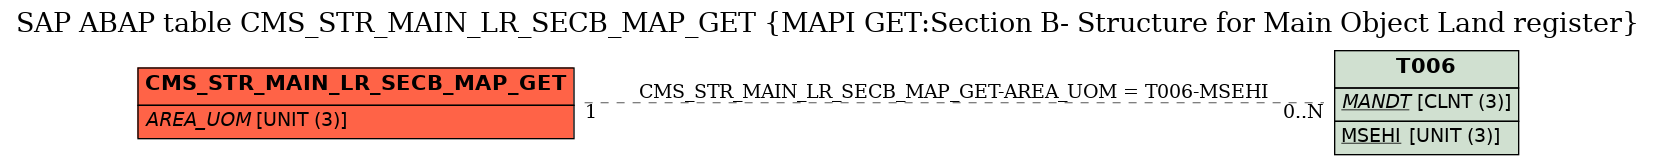 E-R Diagram for table CMS_STR_MAIN_LR_SECB_MAP_GET (MAPI GET:Section B- Structure for Main Object Land register)